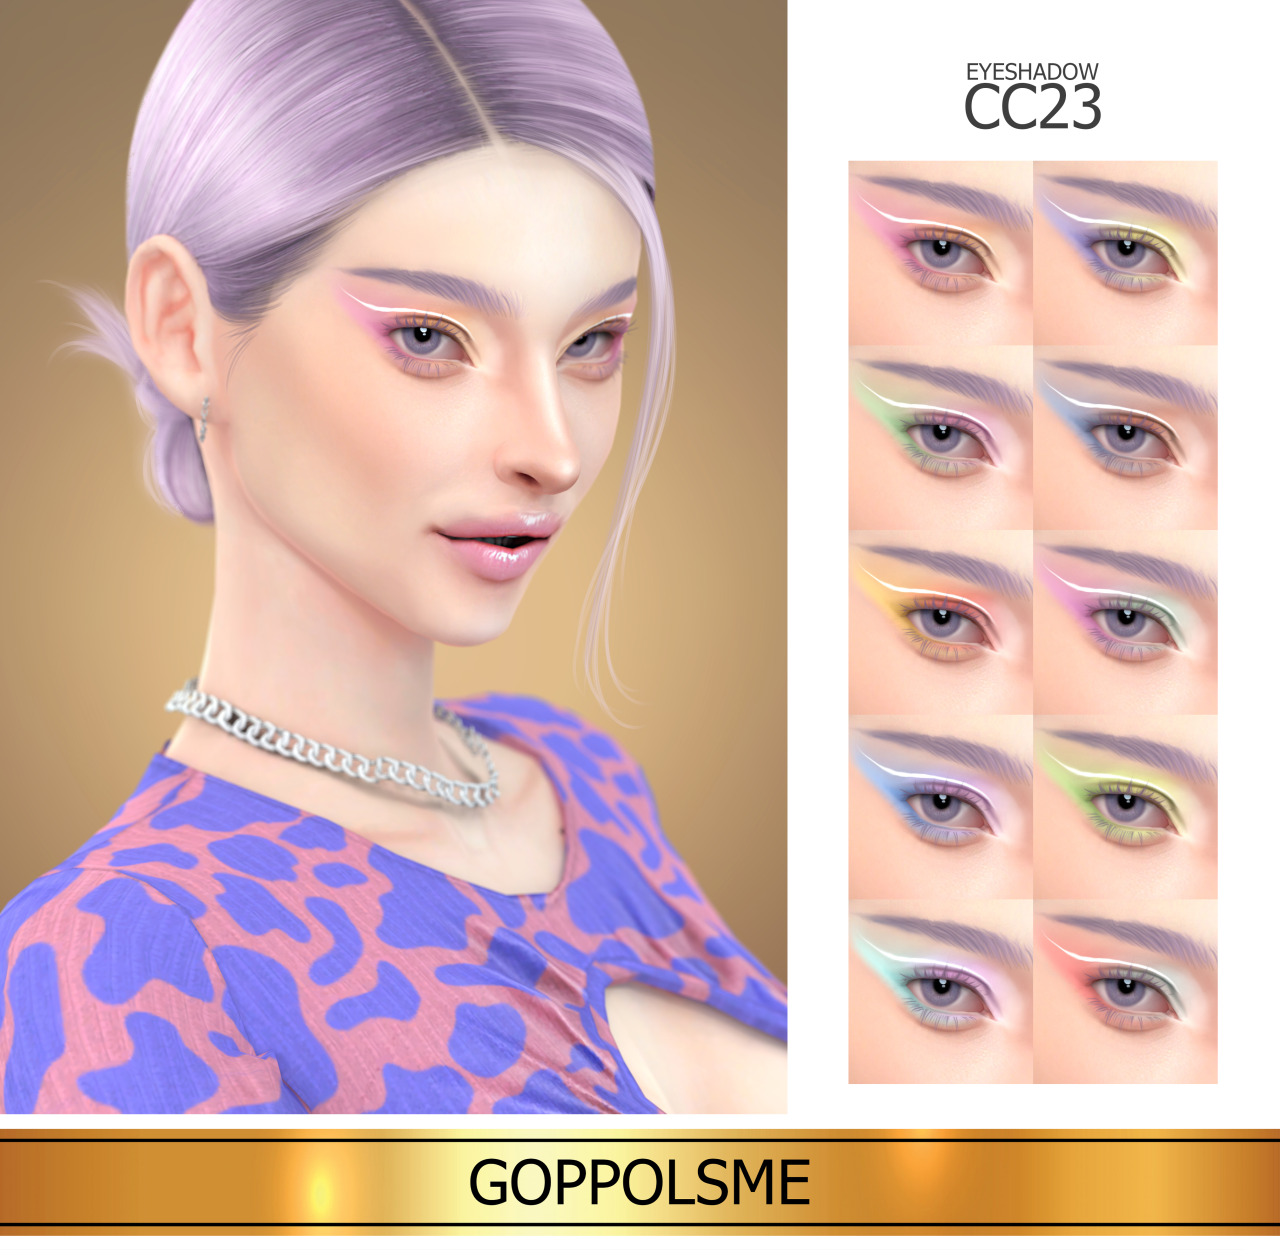 GPME-GOLD Eyeshadow CC 23Download at GOPPOLSME patreon ( No ad )Access to Exclusive GOPPOLSME Patreon onlyHQ mod compatibleThank for support me  ❤  Thanks for all CC creators ❤Hope you like it .Please don’t re-upload #goppolsme#thesims4#sims4cc#sims4ccfinds#sims4eyeshadow#s4cc#s4ccfinds#s4eyeshadow